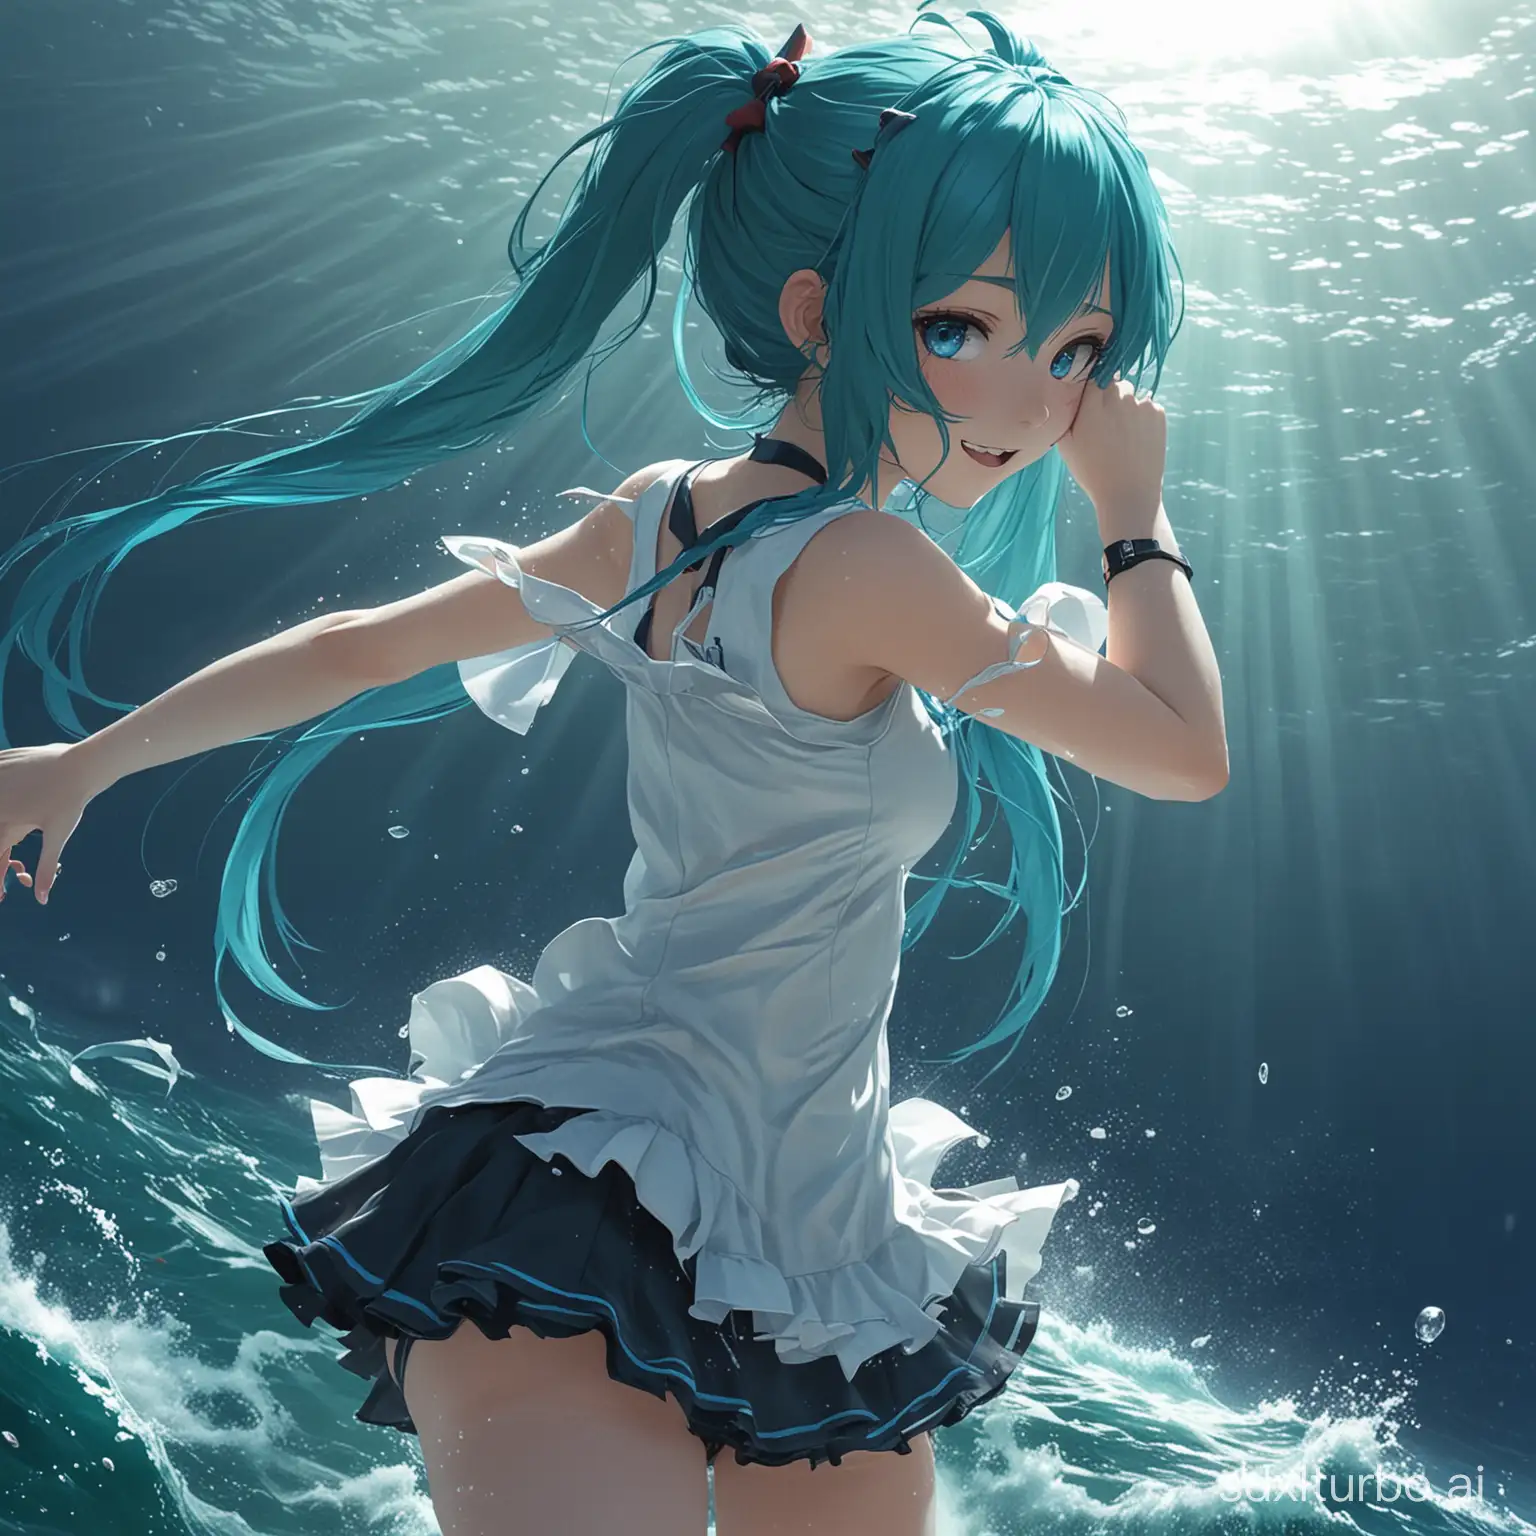 in the deep sea a girl blue double ponytail
Miku falling into the sea